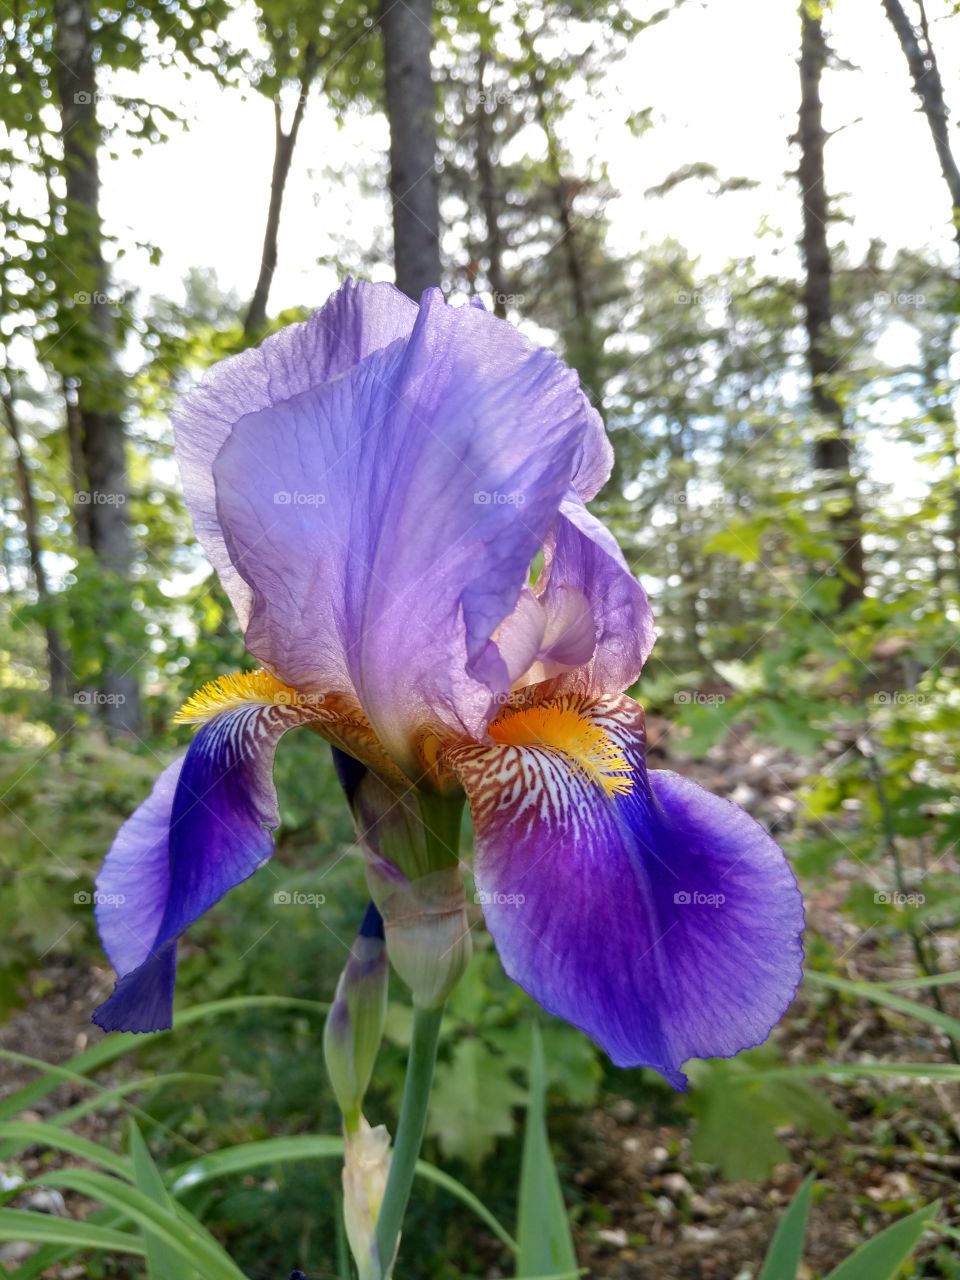 Beautiful Purple Iris. What a beautiful world it is when you stop and enjoy the details 😍